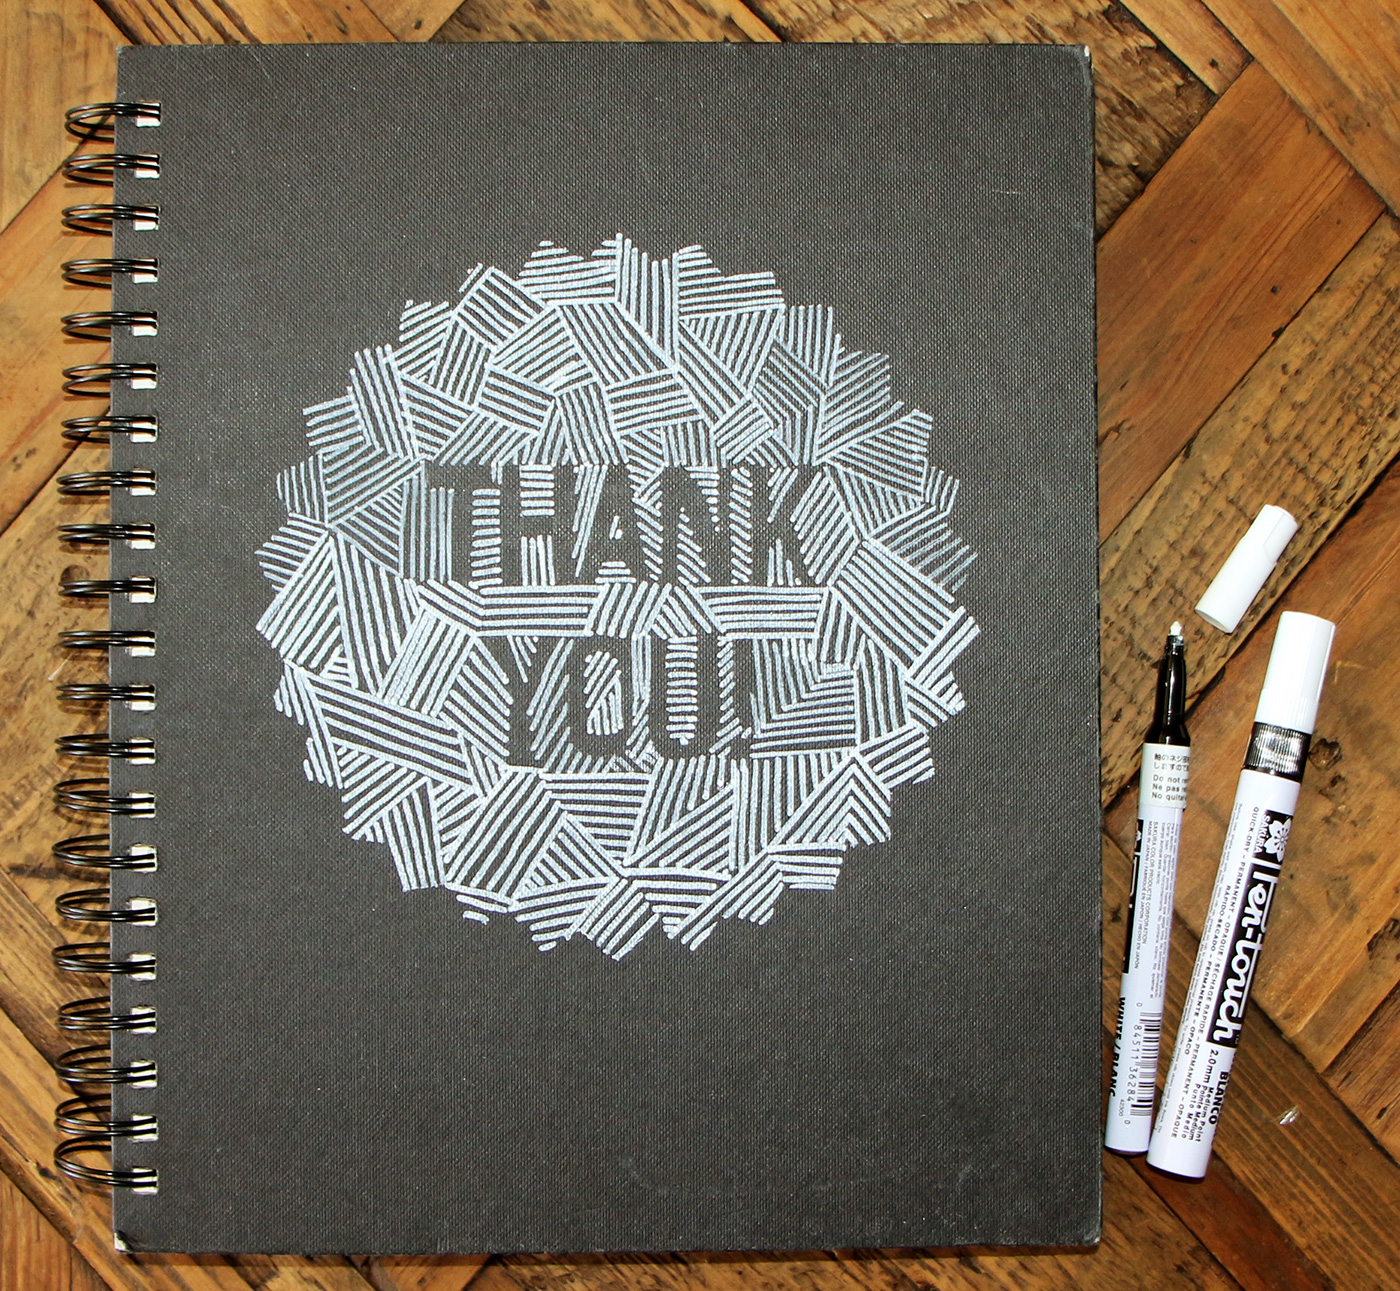 thank you acknowledgements cards gratitude handmade lettering sketch appreciations book